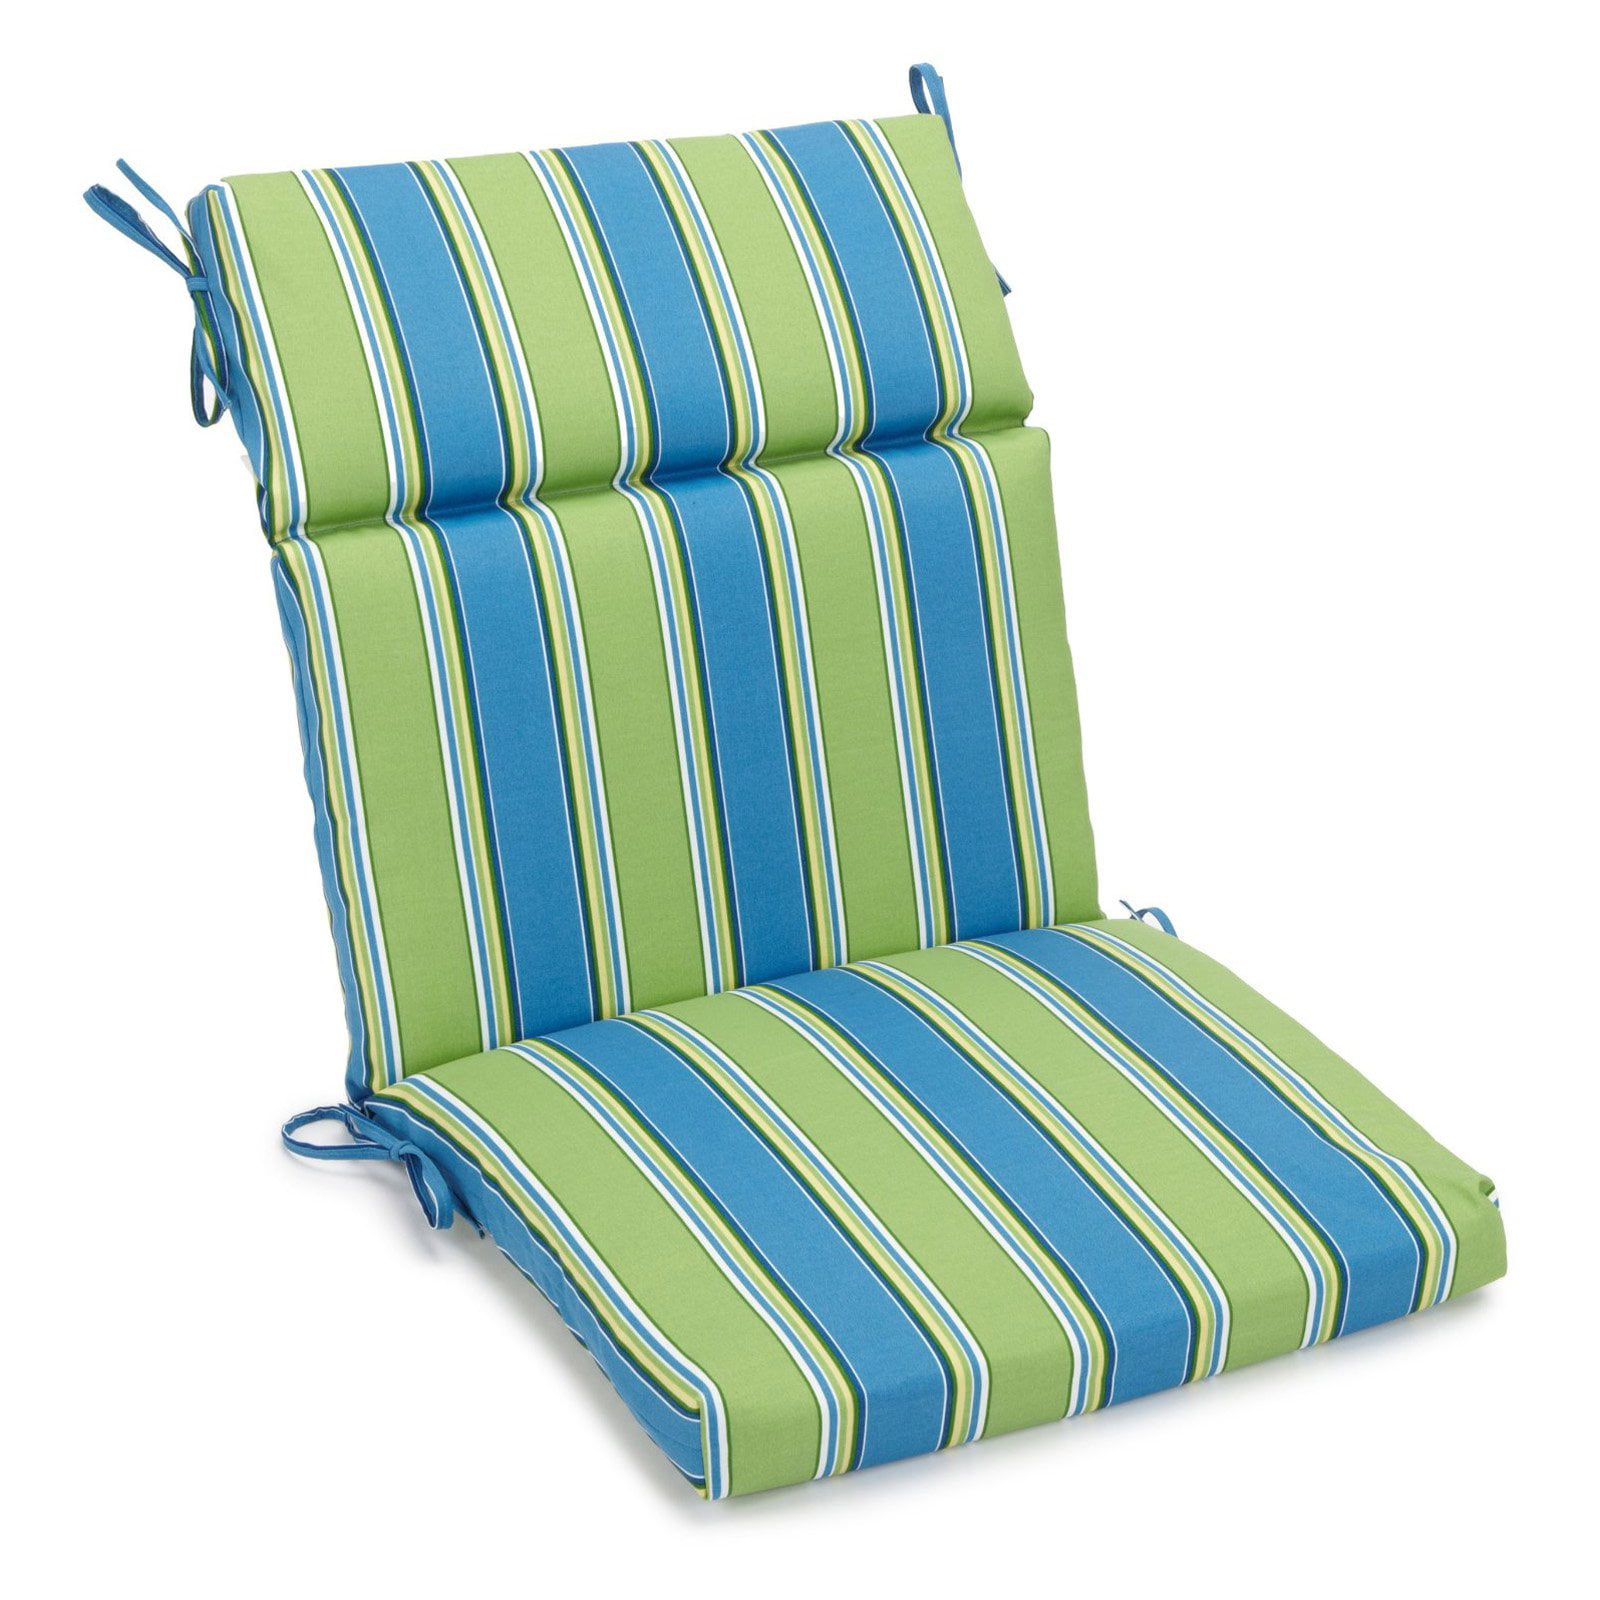 Unique Chair Cushion Covers Outdoor for Small Space